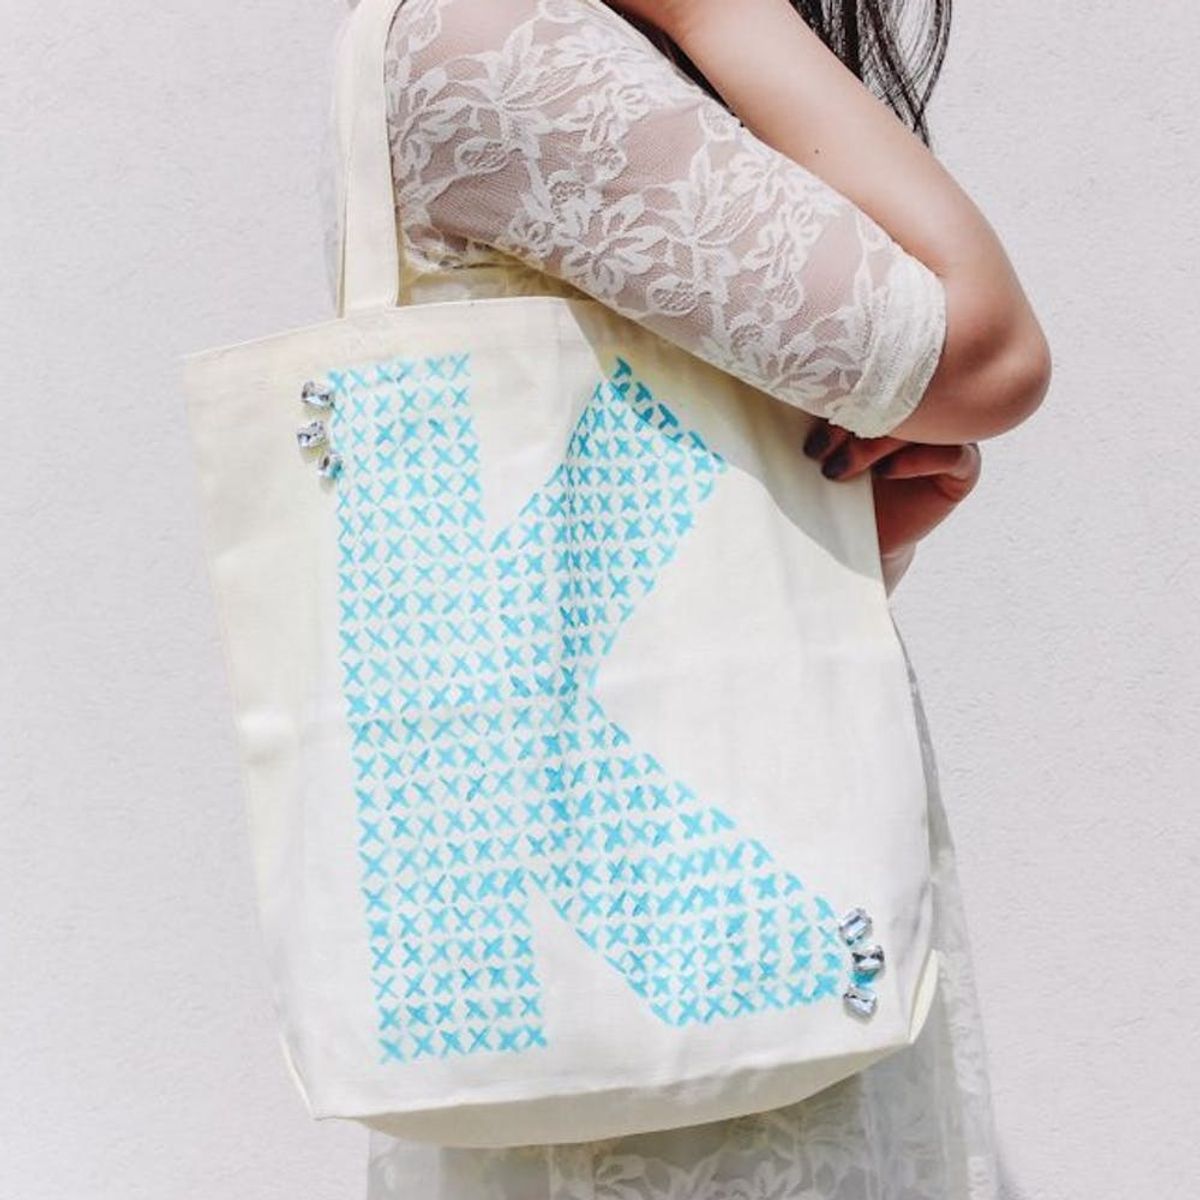 How to Make a No-Sew Cross-Stitched Monogram Tote Bag